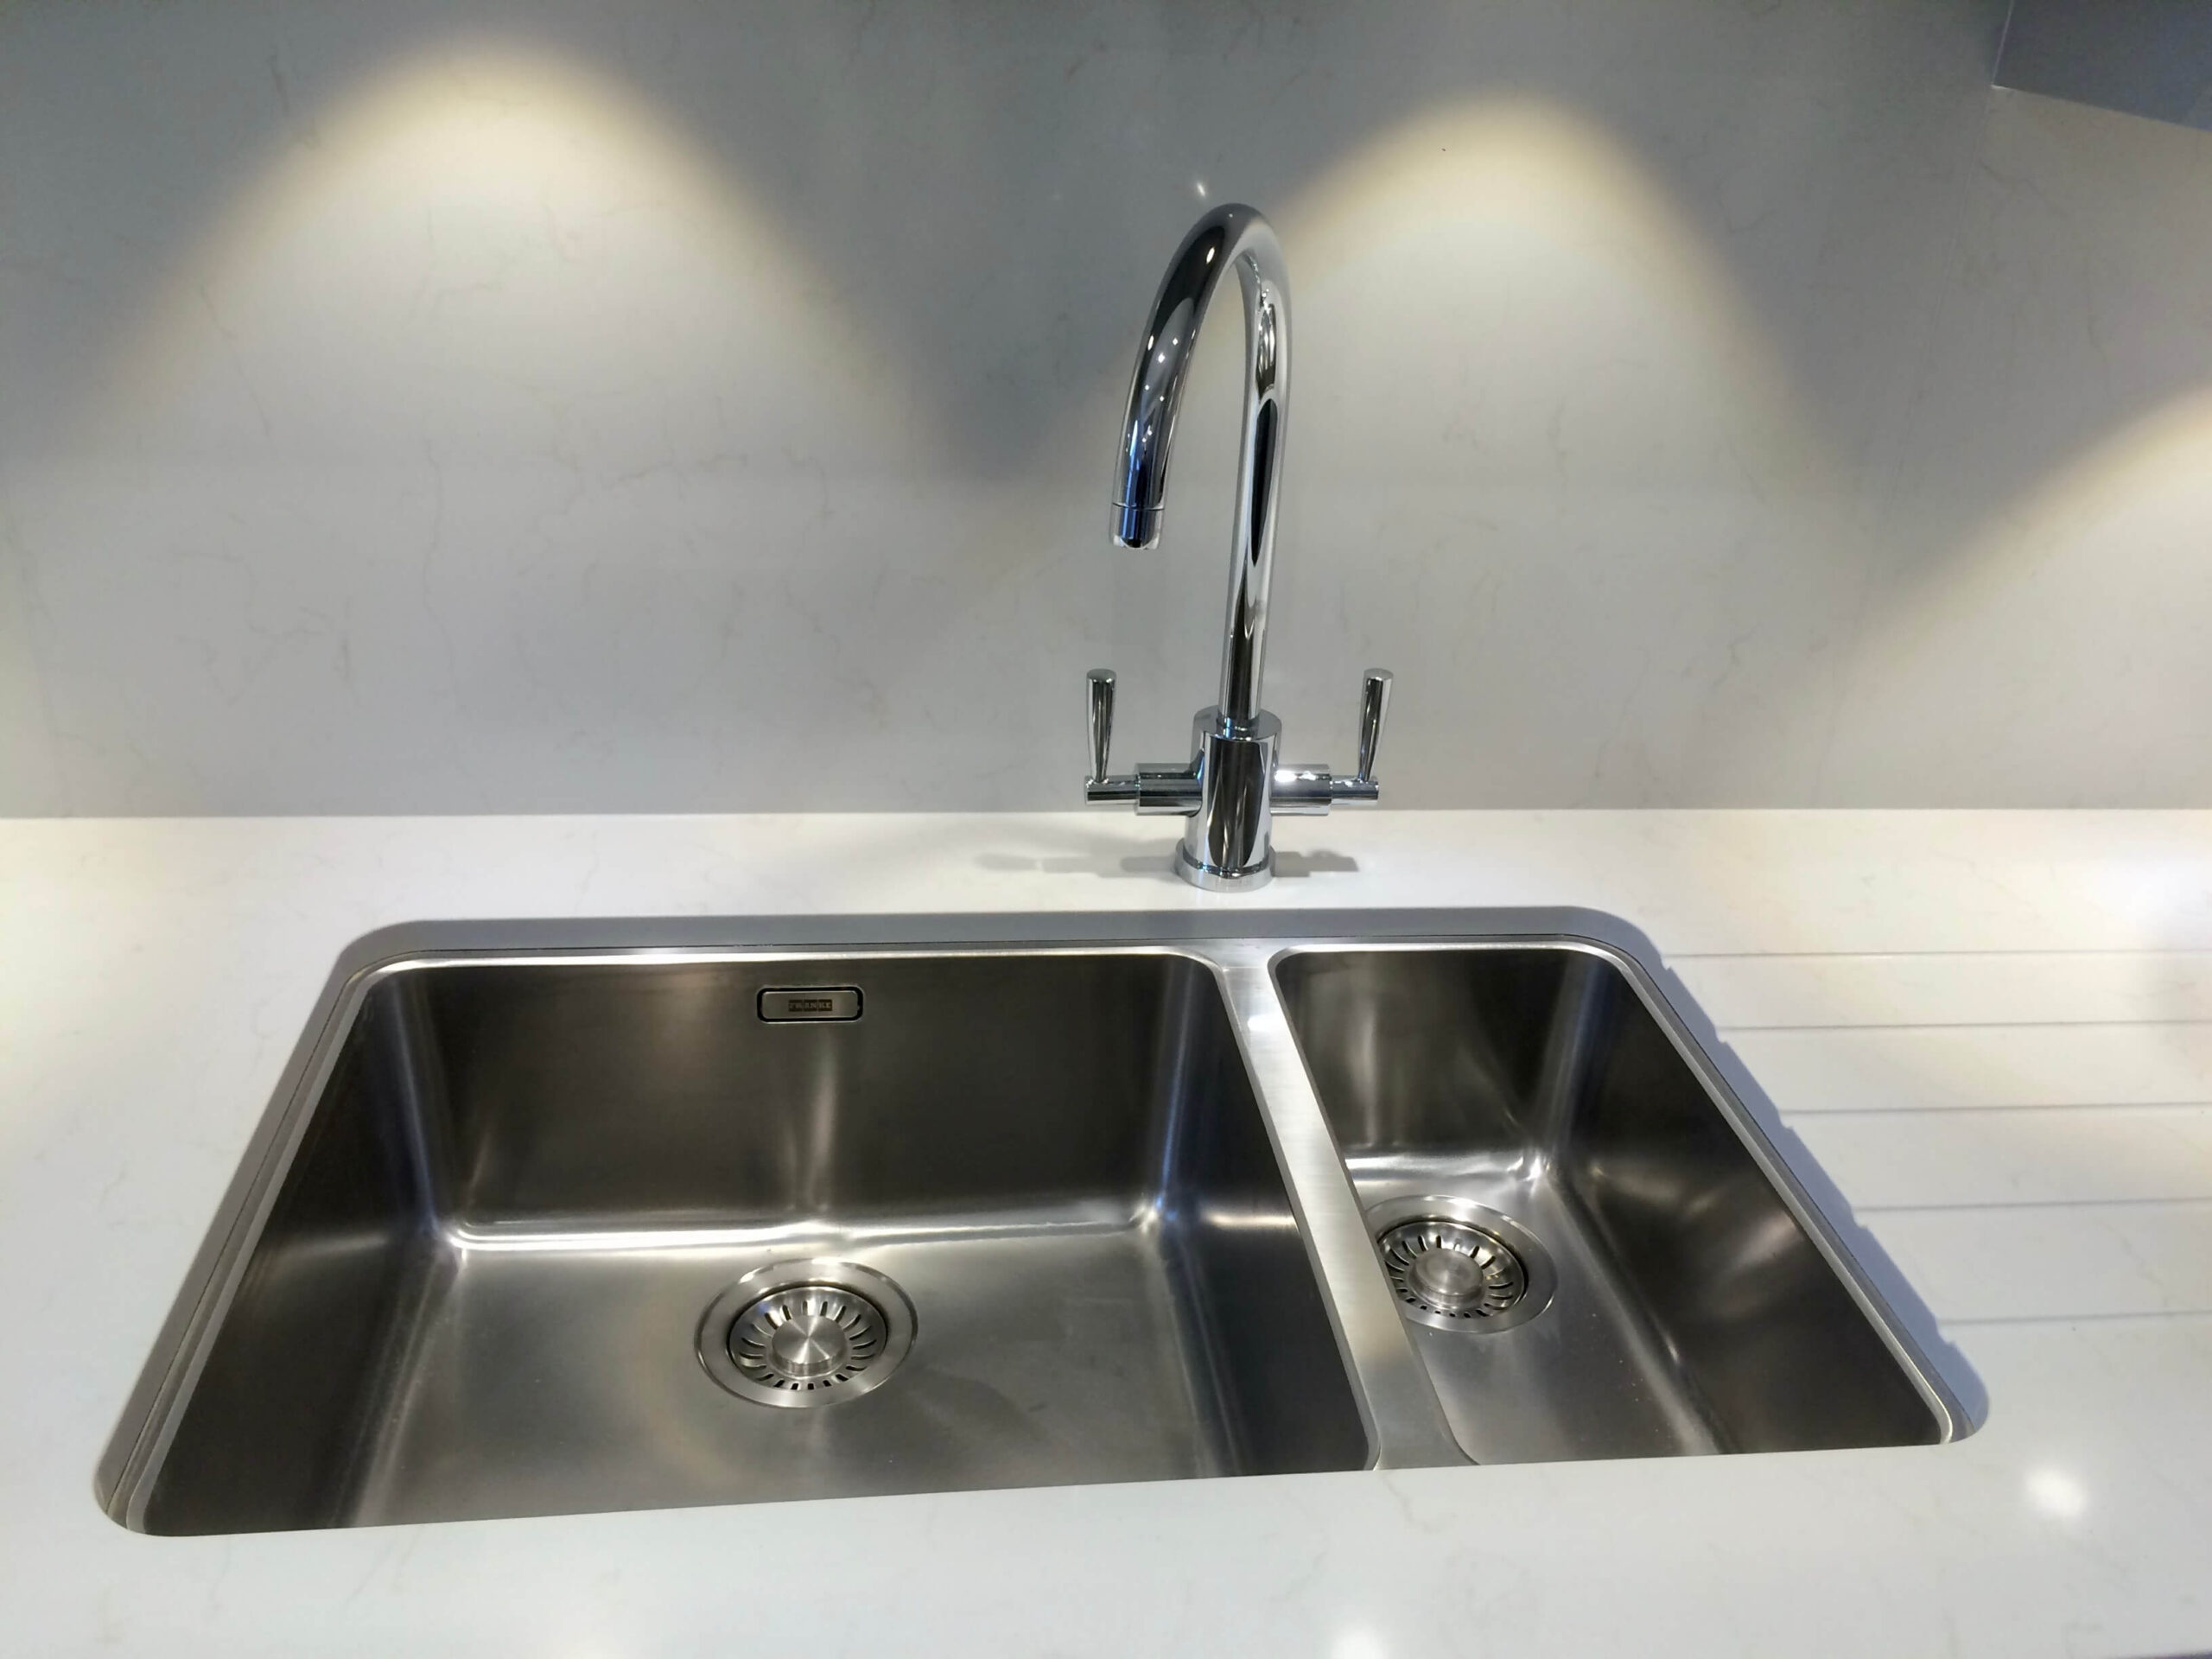 Would you like an upgrade in your kitchen? A great way to do this is by updating your kitchen sink design.